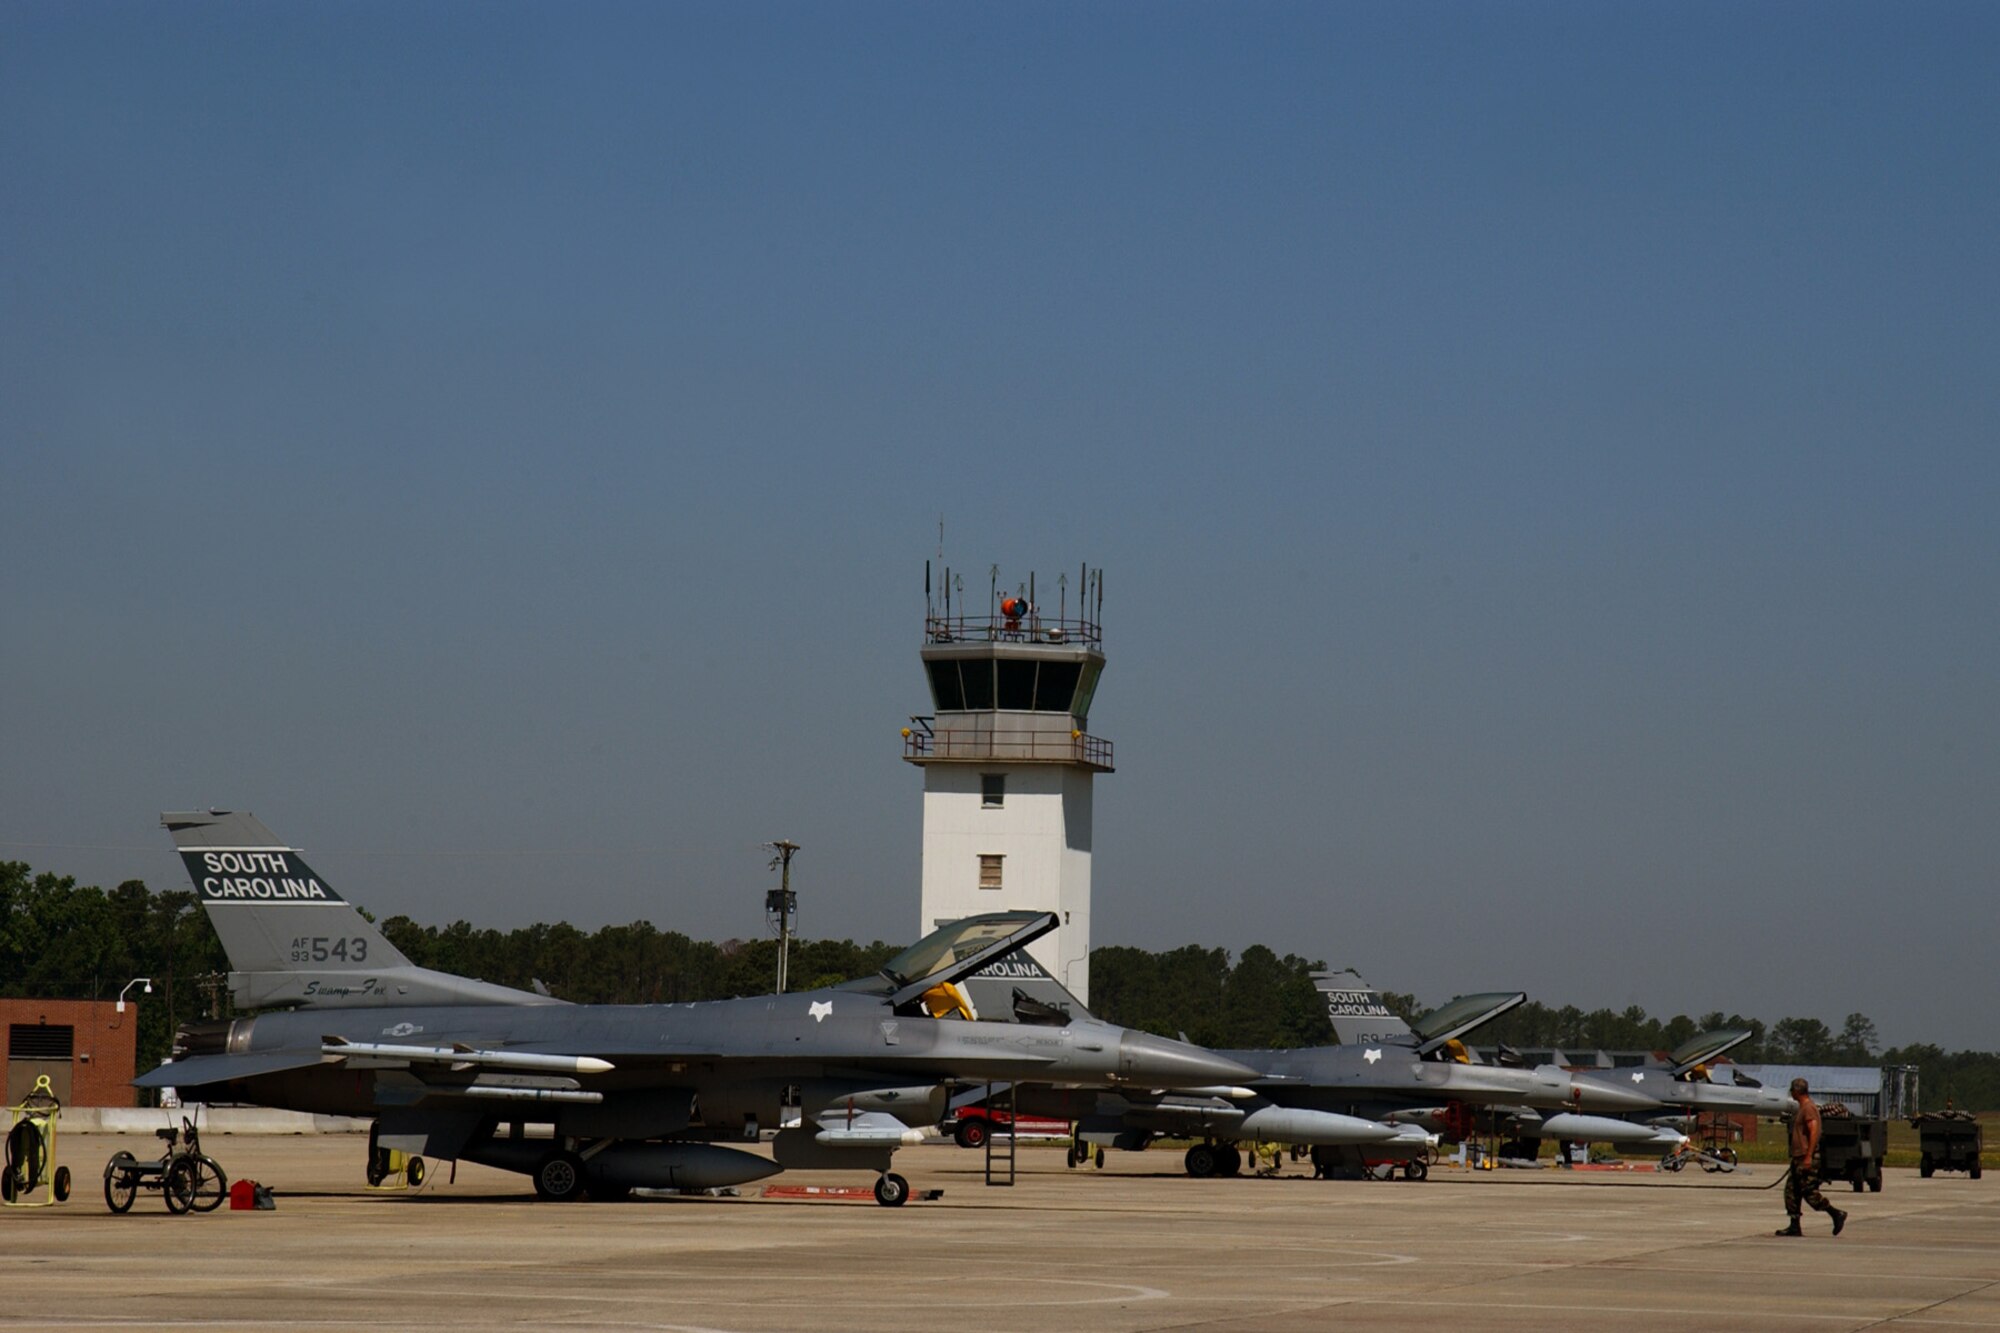 F-16 Fighter ramp operations are conducted at McEntire Joint Natioanl Guard Base, South Carolina Air National Guard, May 4, 2007.  (U.S. Air National Guard photo by Senior Master Sgt. Edward/Released)